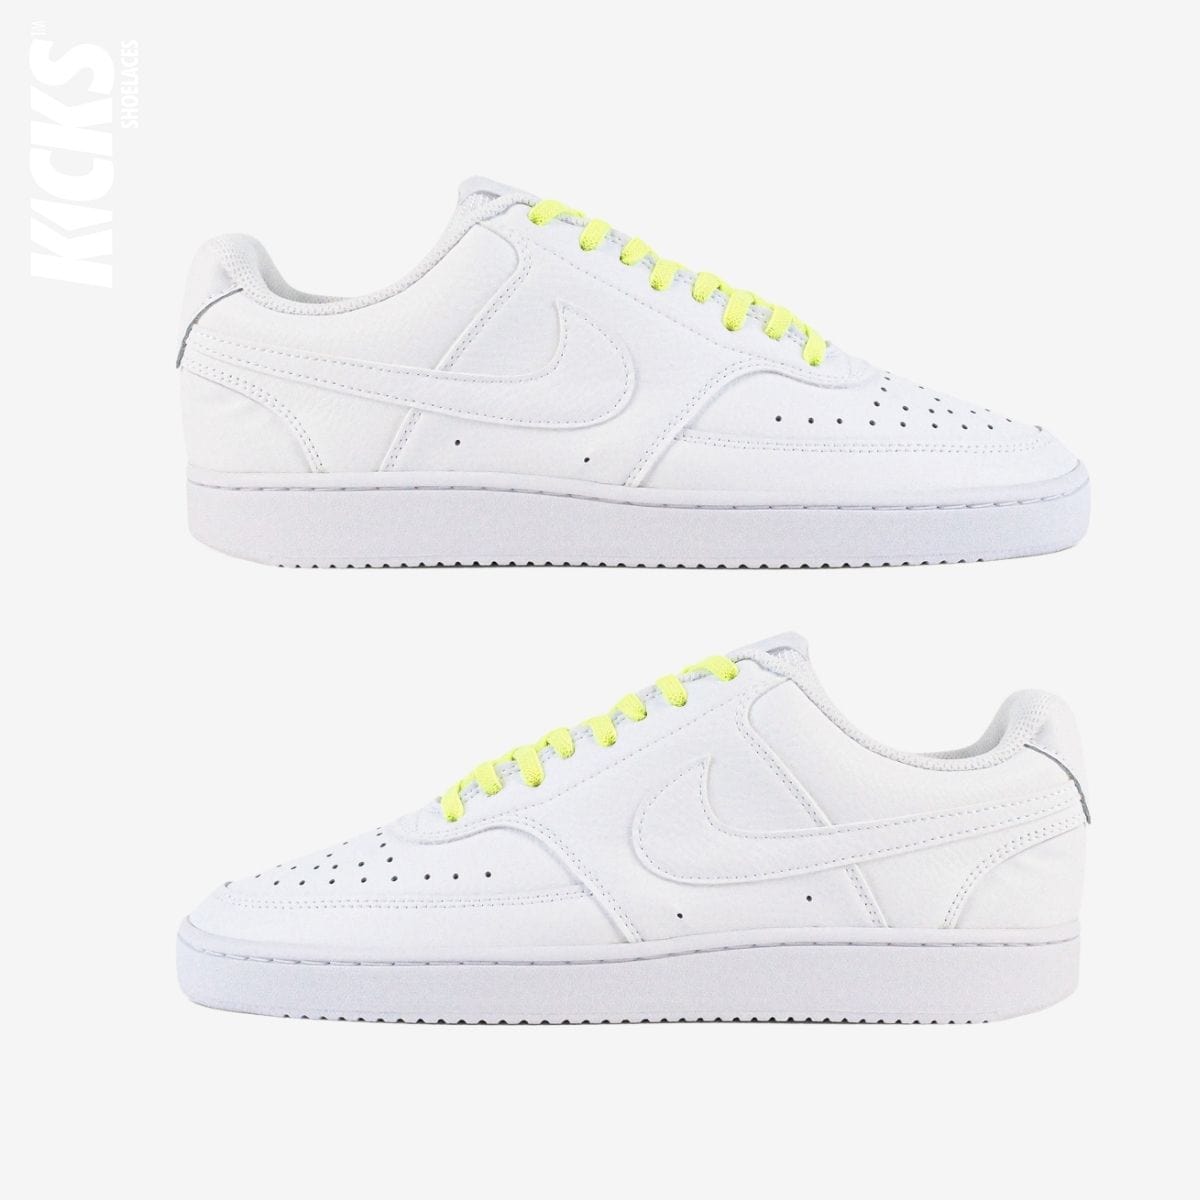 tieless-laces-with-fluorescent-green-laces-on-nike-white-sneakers-by-kicks-shoelaces